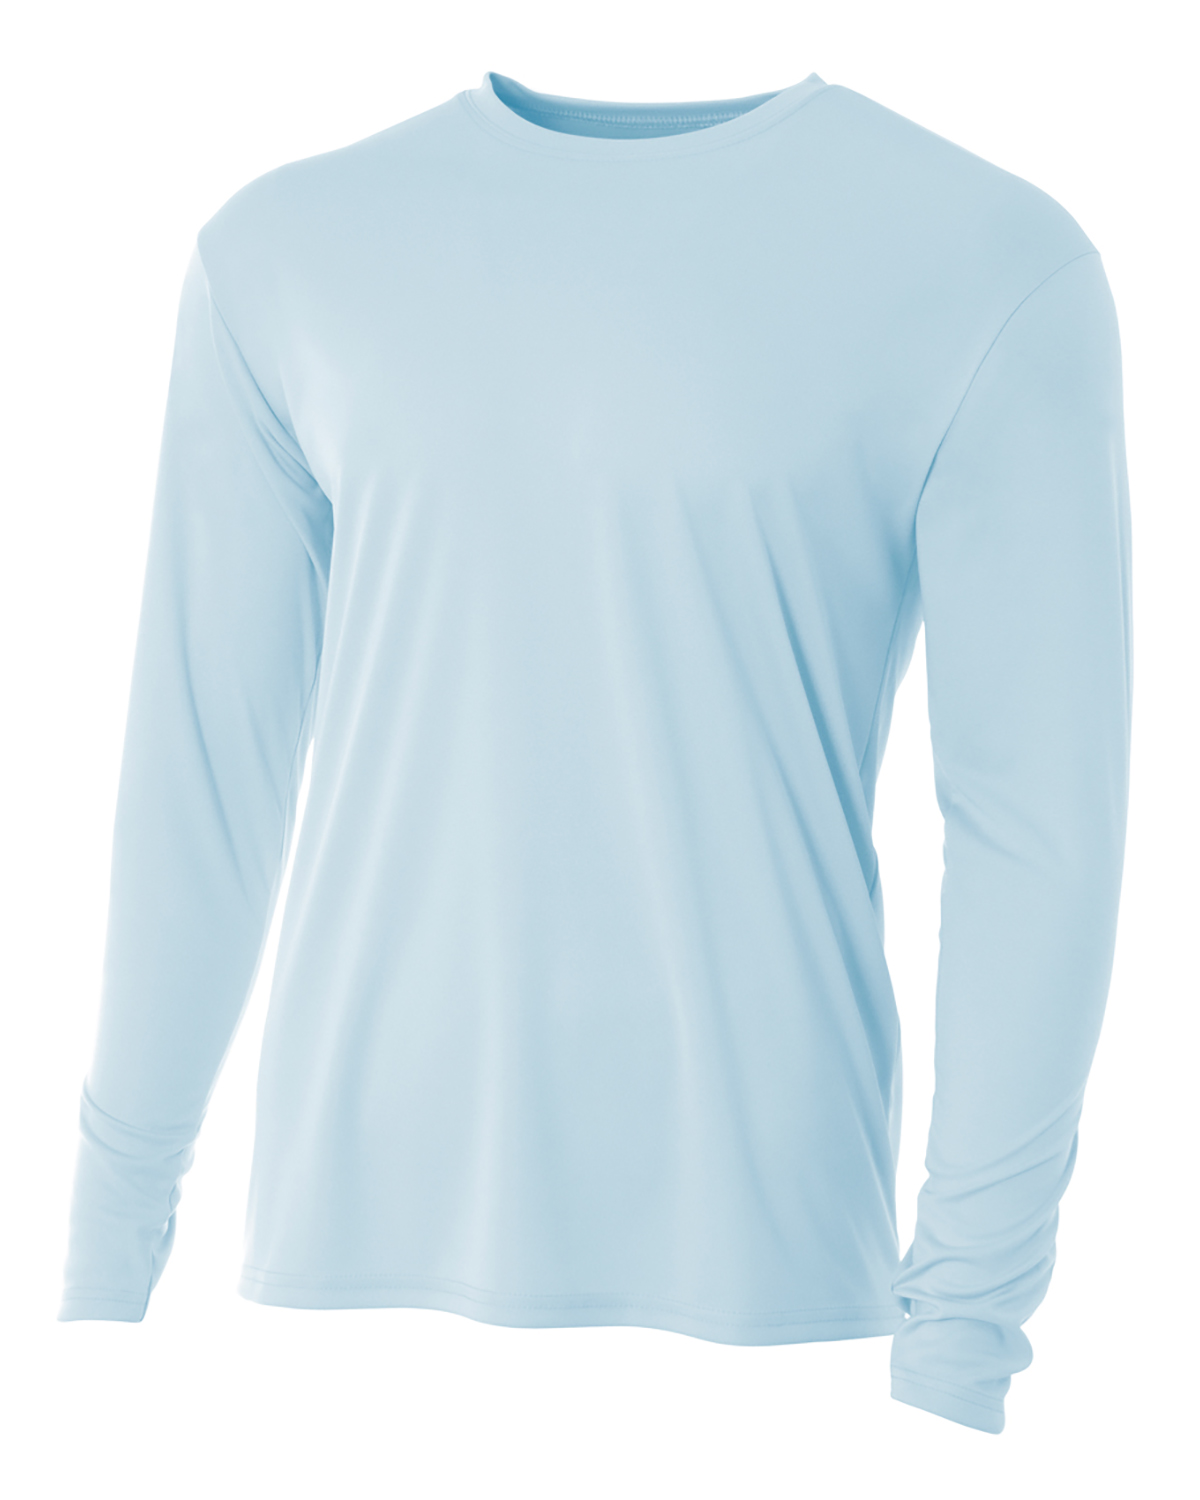 A4 N3165 Men's Cooling Performance Long Sleeve T-Shirt Pastel Blue S